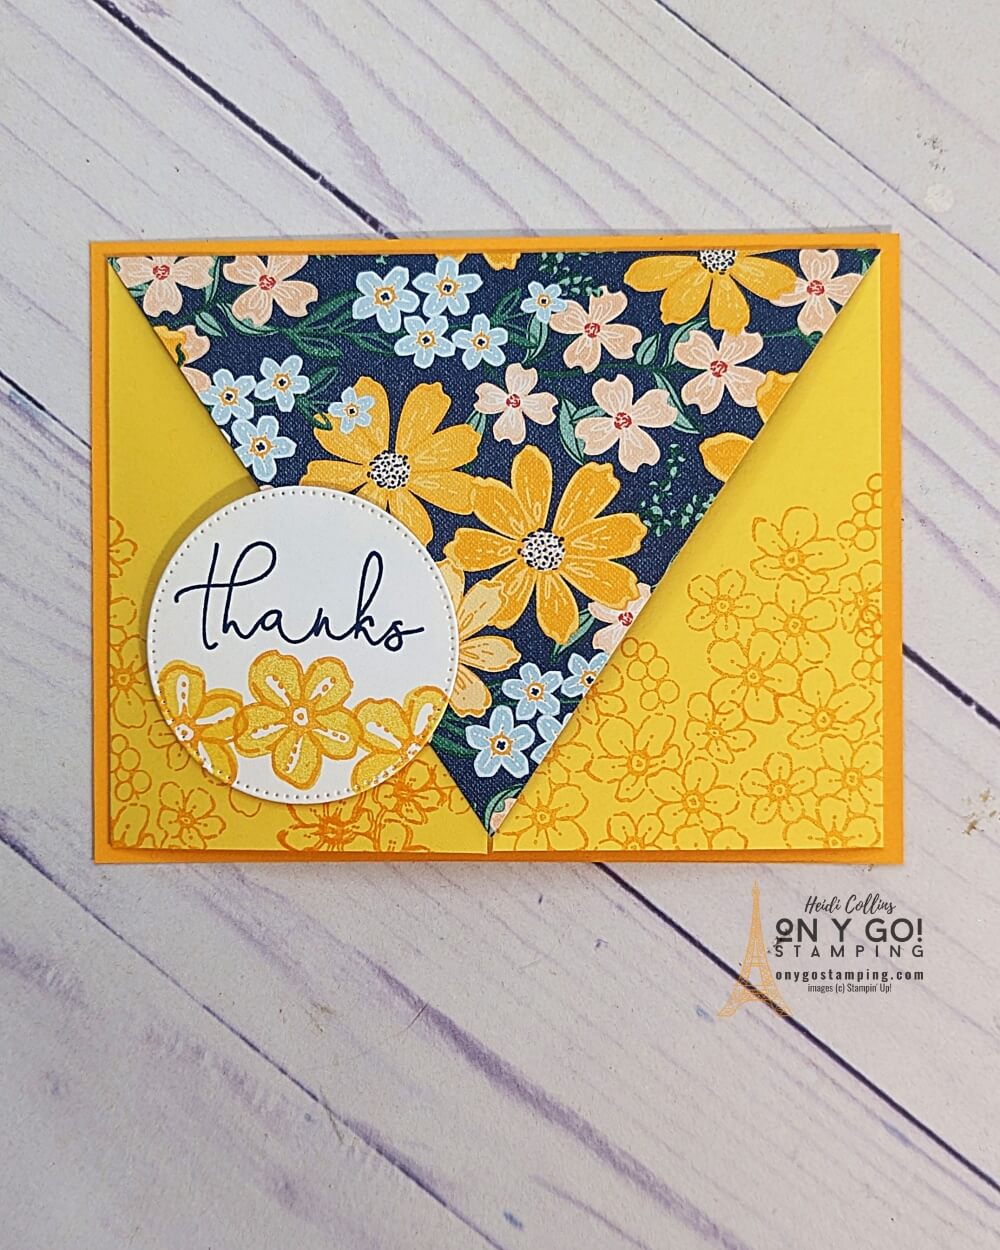 Make a statement with a handmade card designed with style and sophistication. Create a one-of-a-kind envelope closure fun fold card with our patterned paper, Regency Park Designer Series Paper, and the Sentimental Park stamp set from Stampin' Up! This card is easy to assemble, with a beautiful design that will be sure to impress. Send a special greeting with our unique card making supplies and turn card-making into an art.